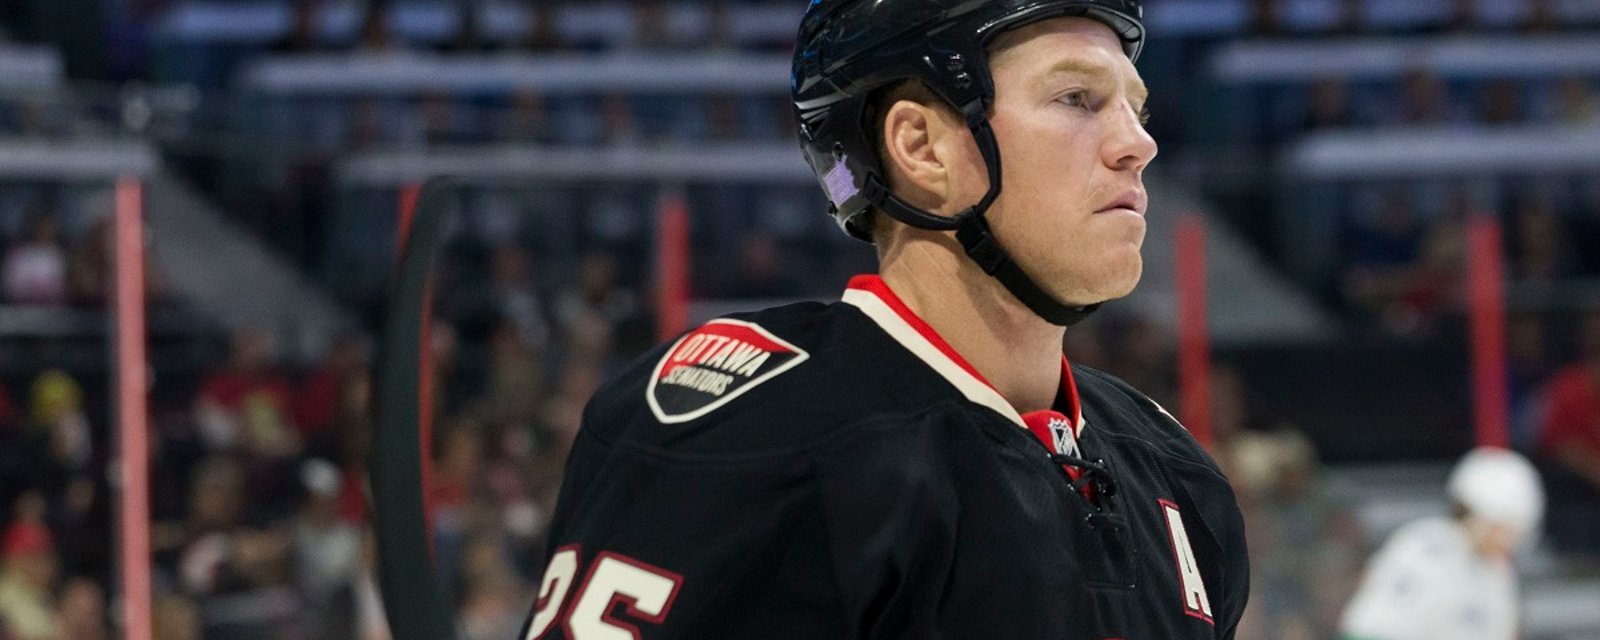 Breaking: NHL enforcer Chris Neil may soon be playing for rival team!